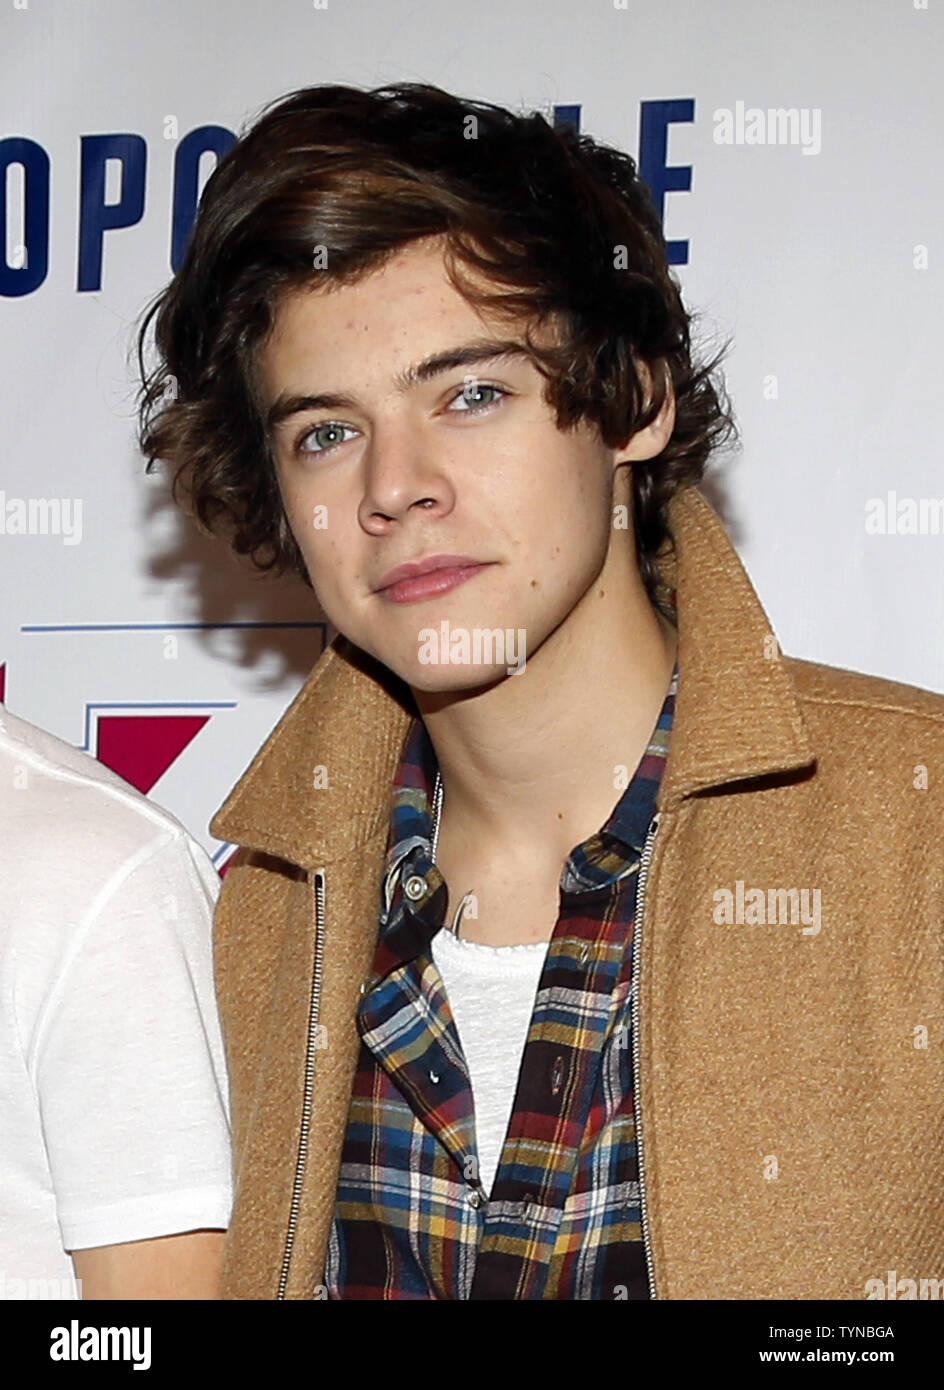 Harry Styles With One Direction Attend Z100 S Jingle Ball 2012